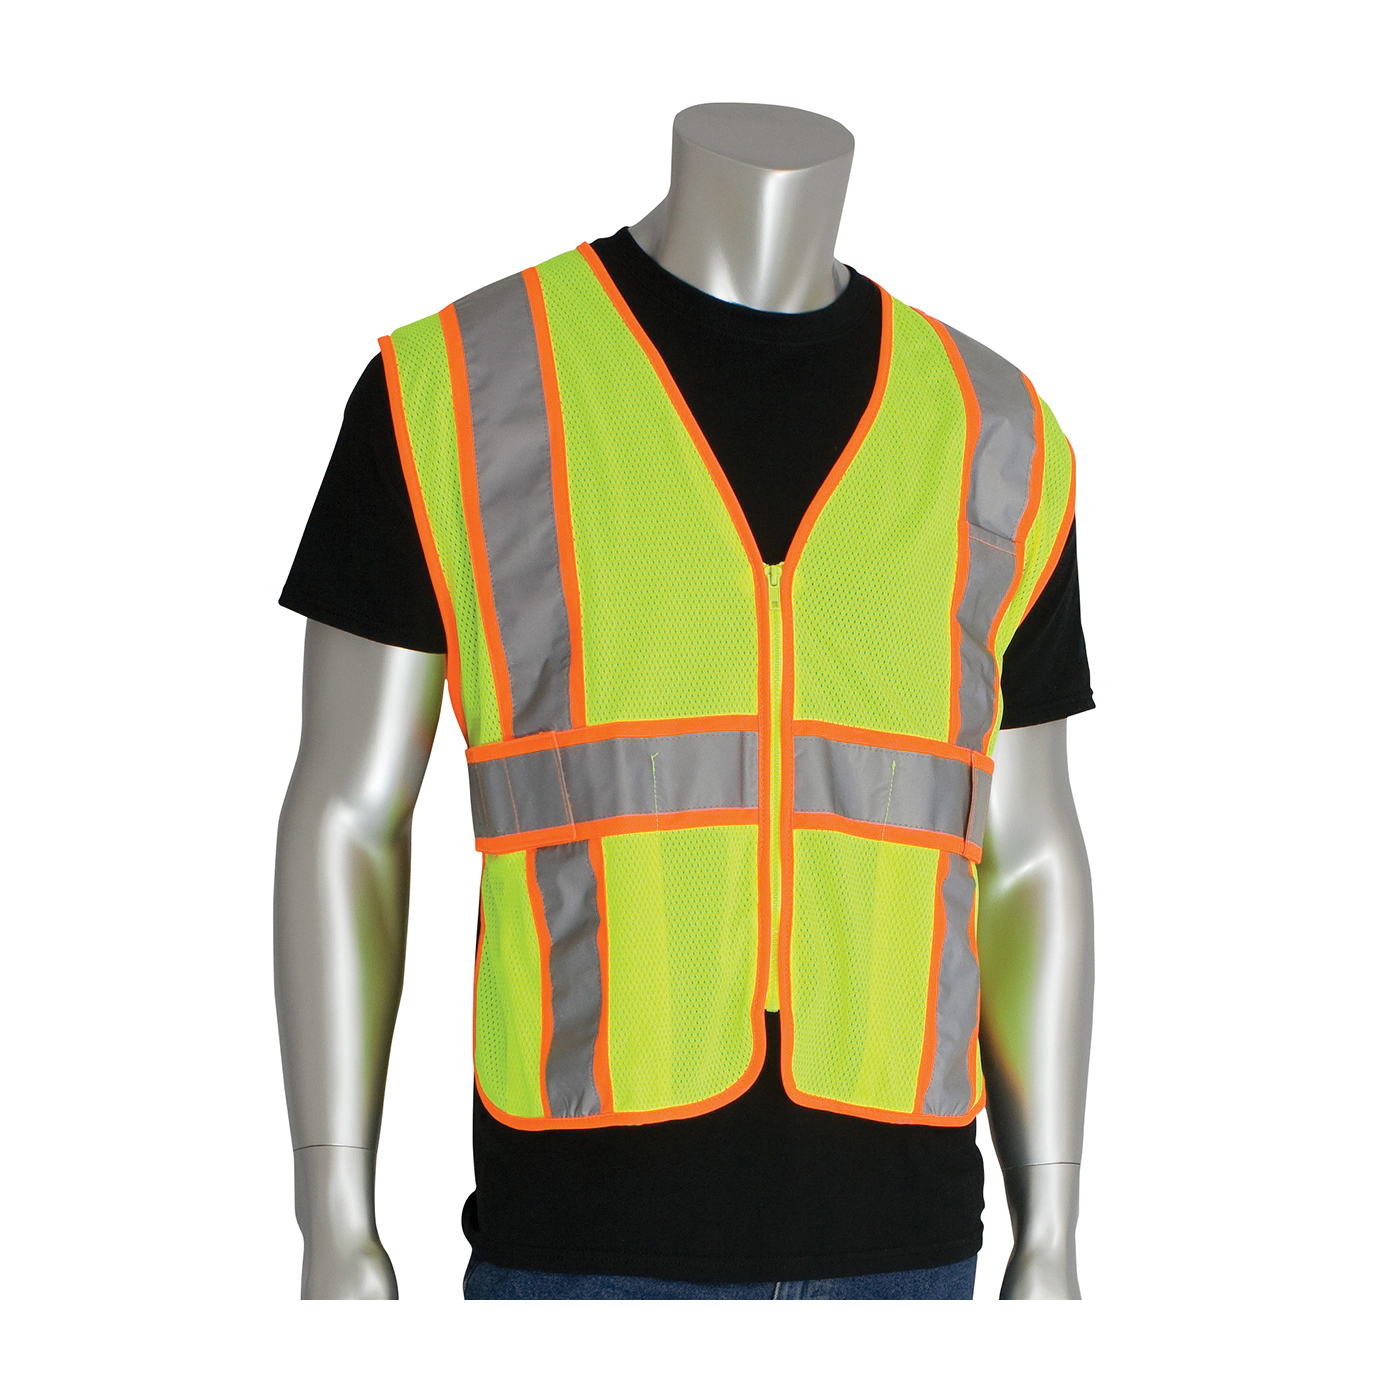 PIP® 302-USV5LY 2-Tone Expandable Safety Vest, Universal, Hi-Viz Lime Yellow, Polyester, Zipper Closure, 3 Pockets, ANSI Class: Class 2, Specifications Met: ANSI 107 Type R